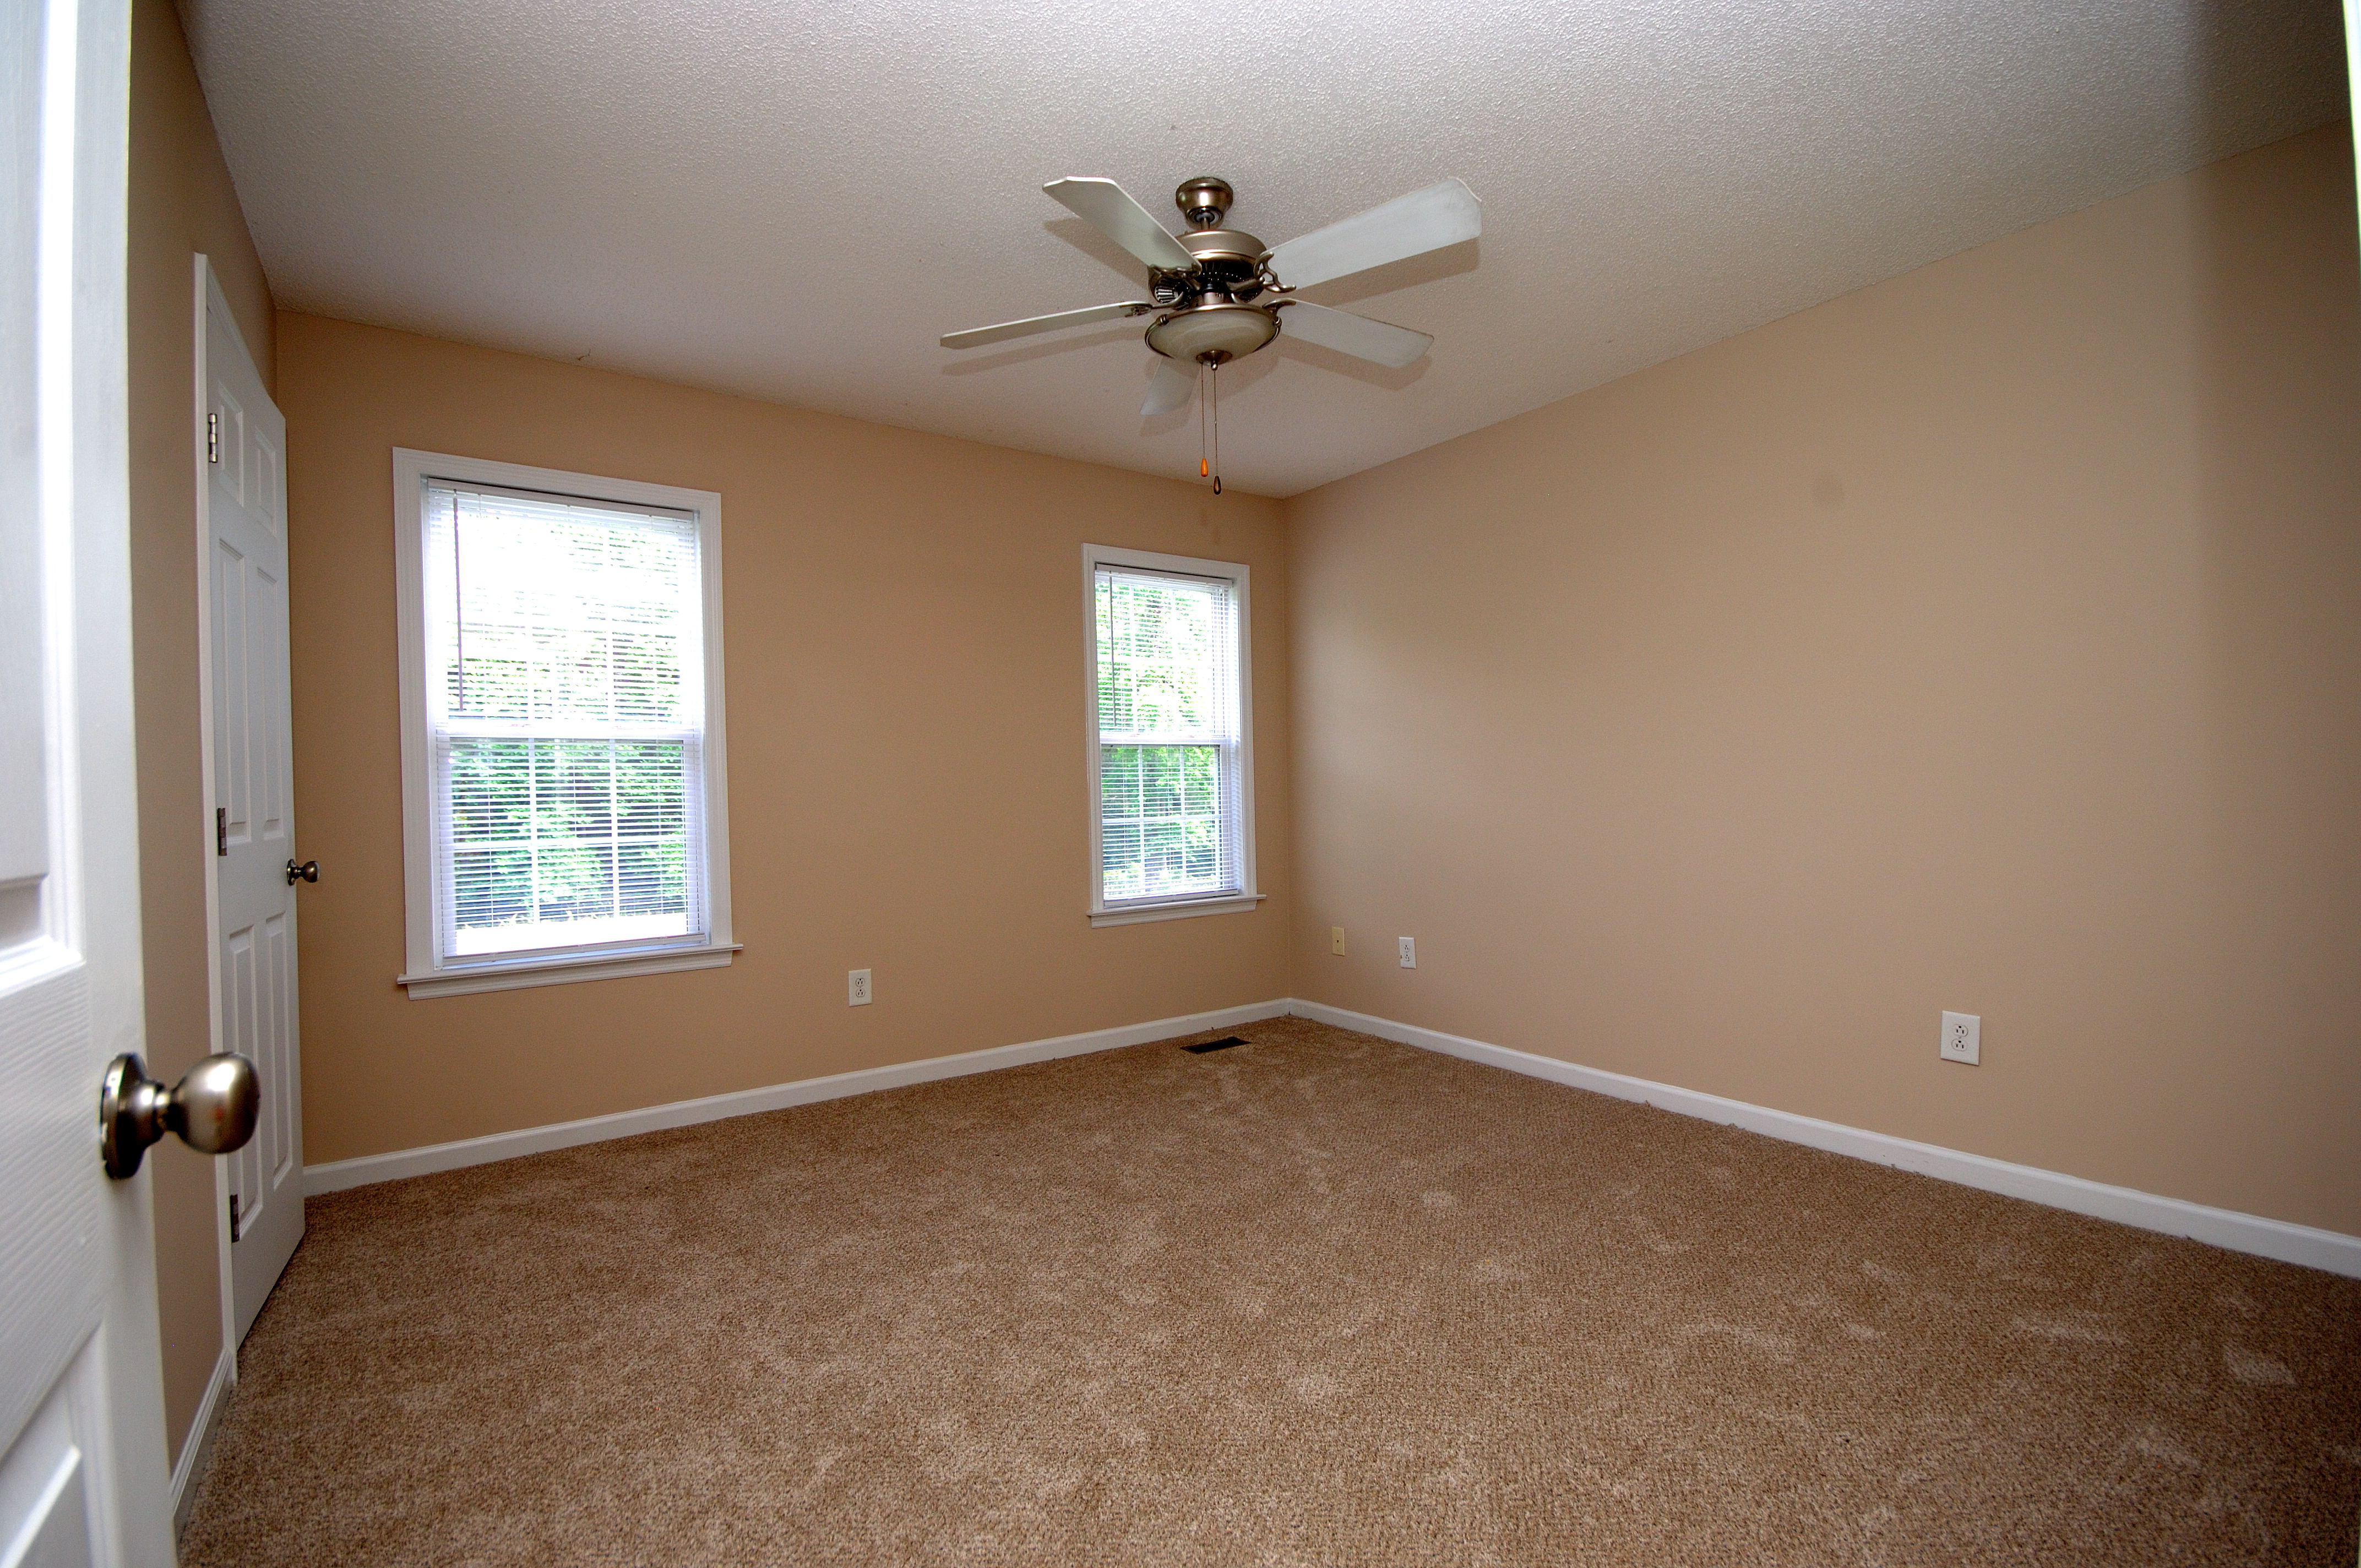 Goldsboro NC - Homes for Rent - 220 Koufax Drive Pikeville NC 27863 - Master Bedroom